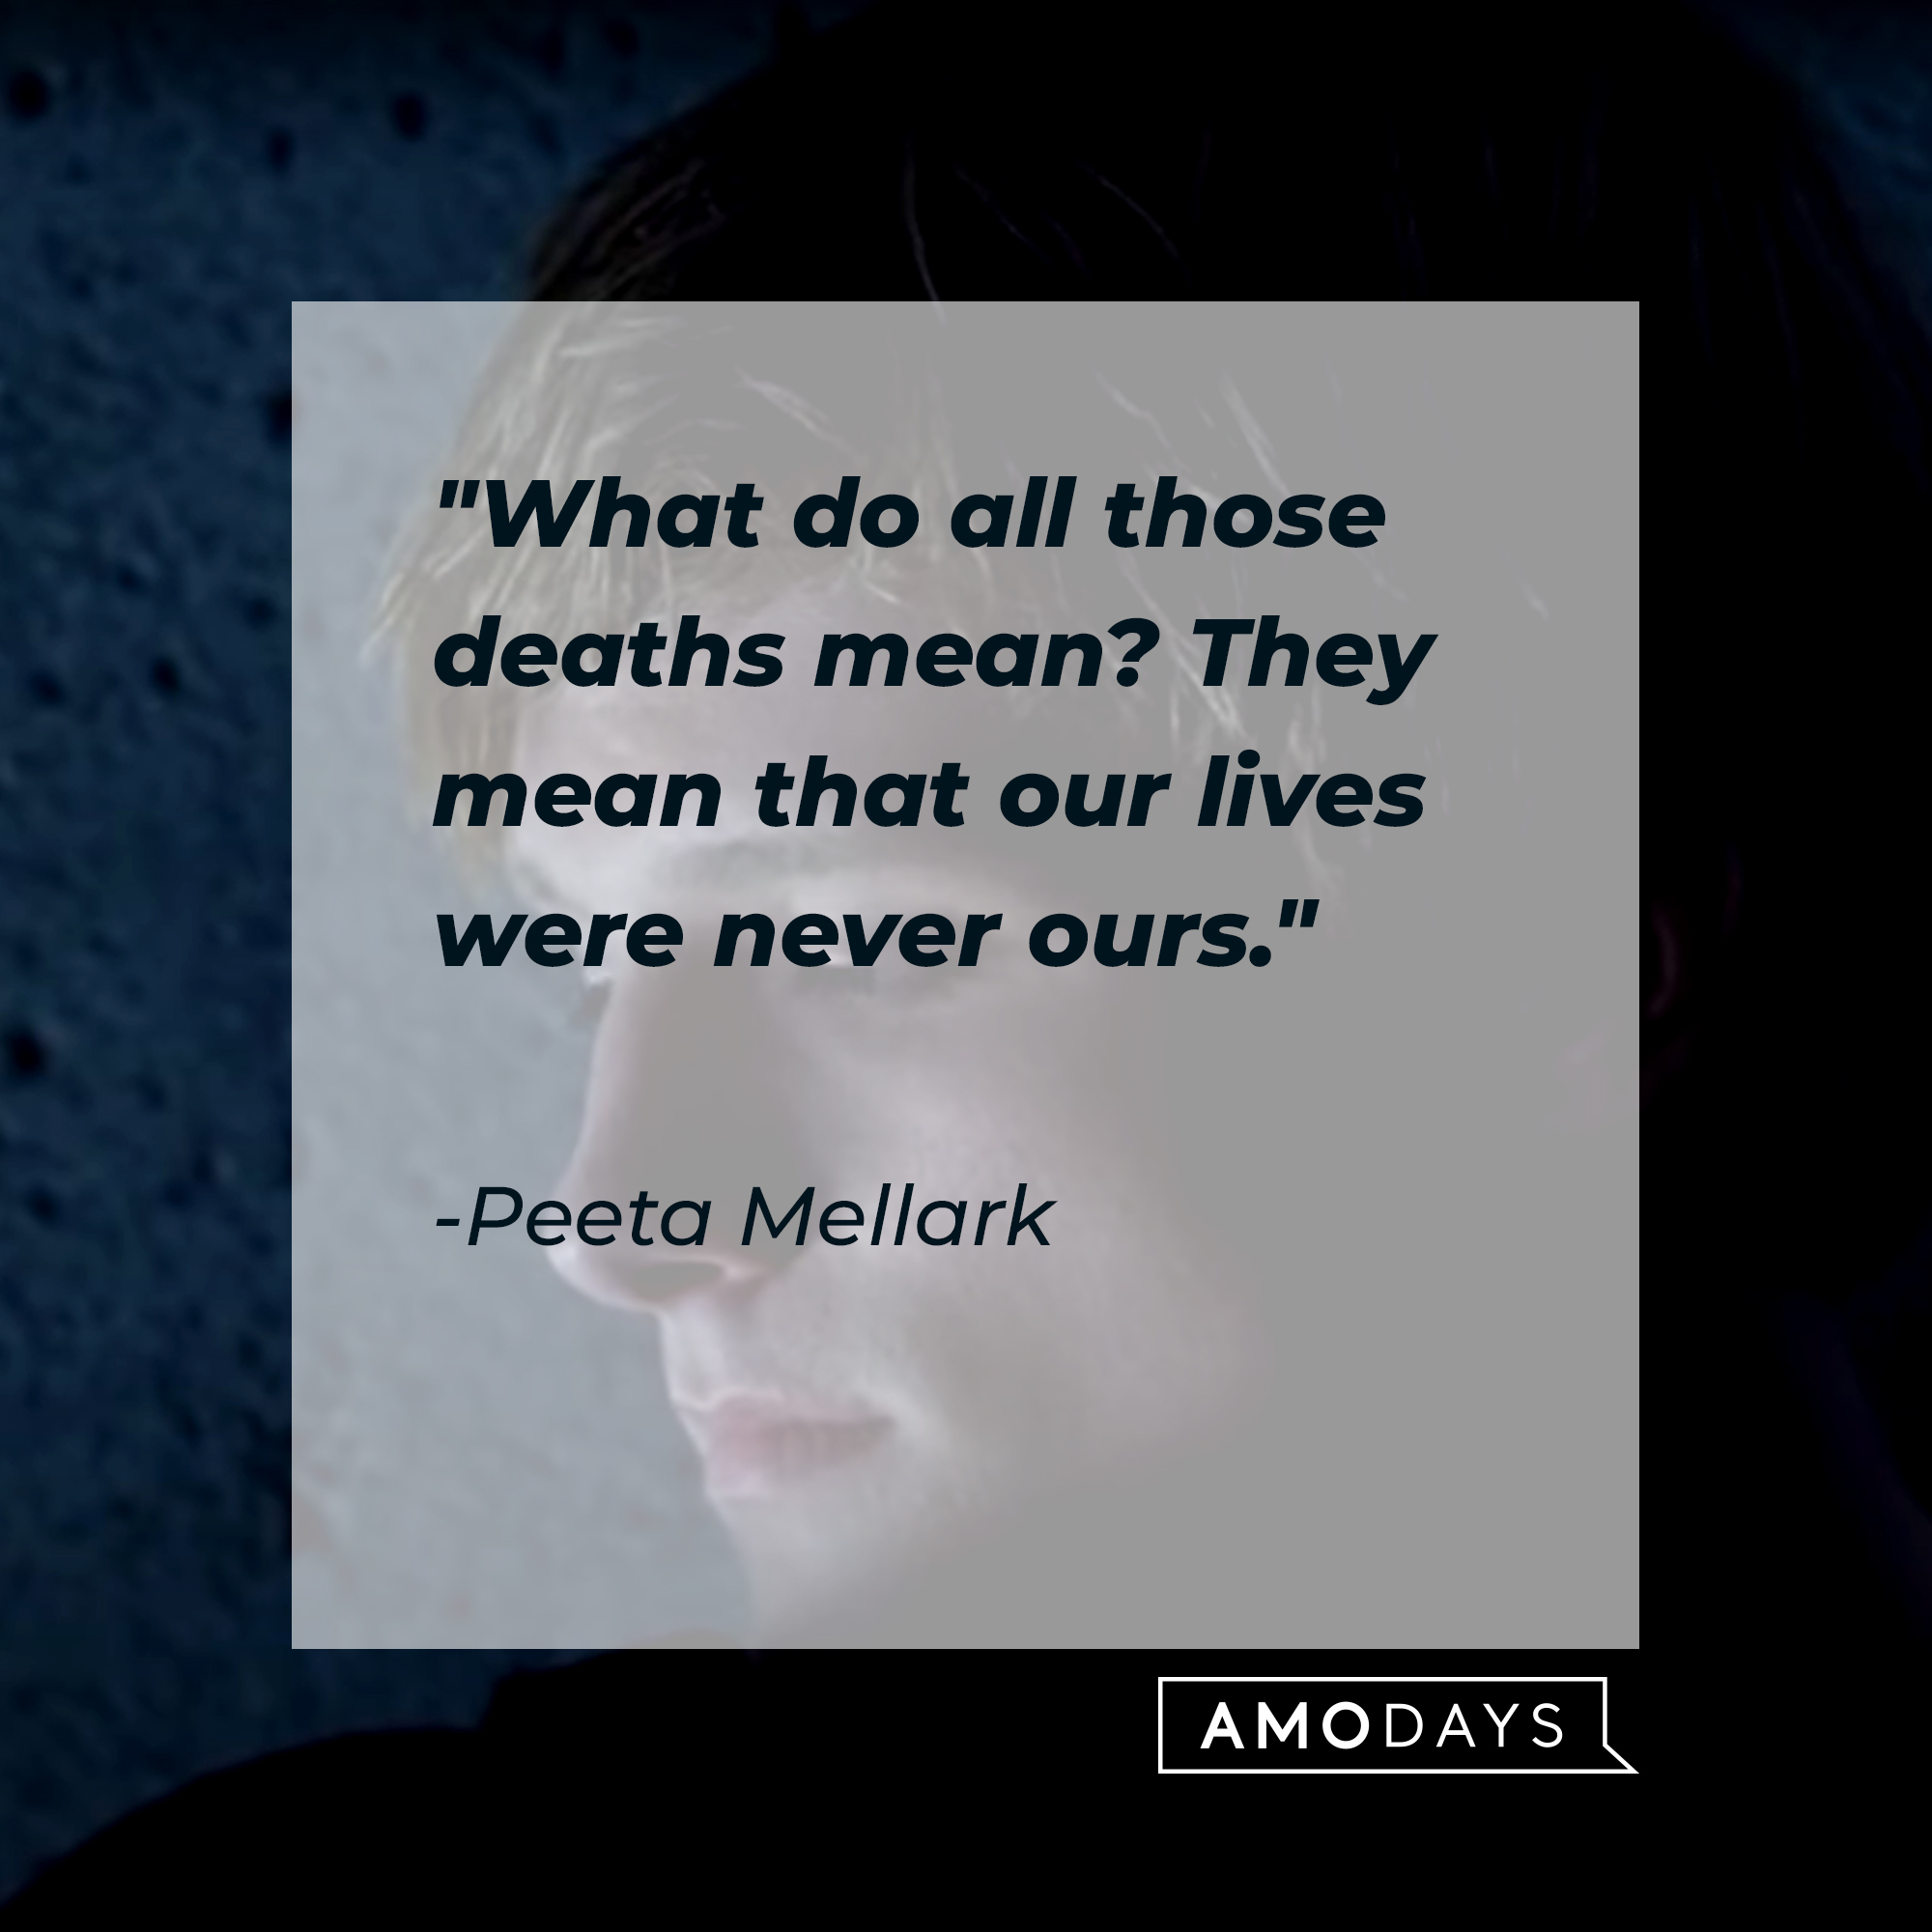 Peeta Mellark, with his quote: "What do all those deaths mean? They mean that our lives were never ours." | Source: Youtube.com/TheHungerGamesMovies